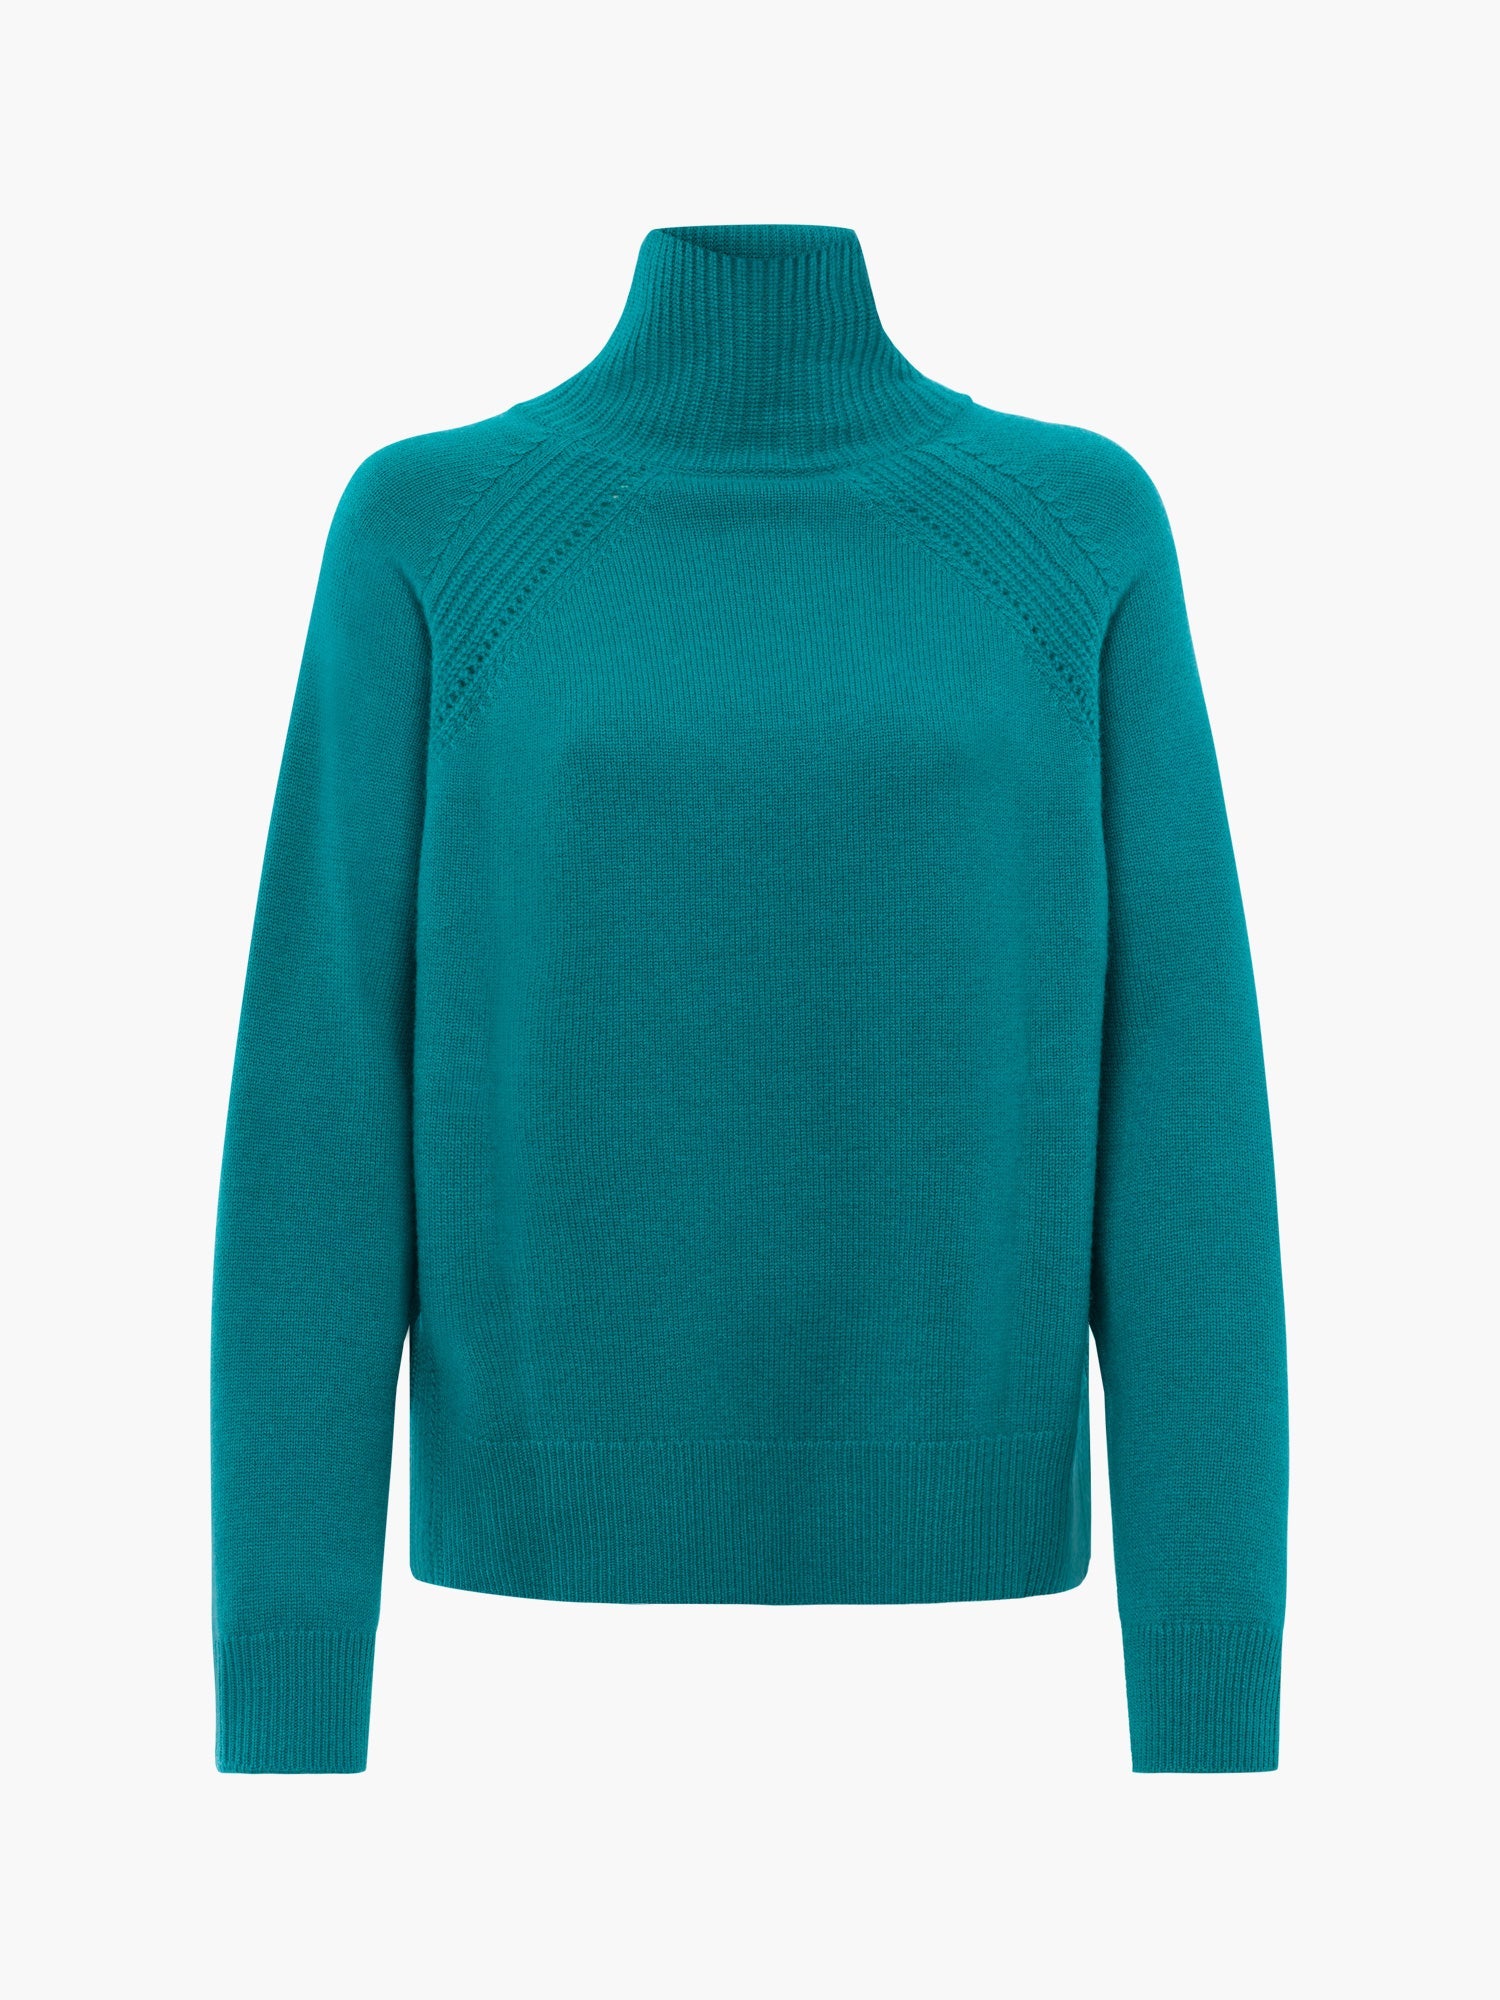 FTC-Cashmere-OUTLET-SALE-Pullover-Highneck-Strick-ARCHIVE-COLLECTION_b0d733f9-8437-44fc-bf56-240c982959c7.jpg